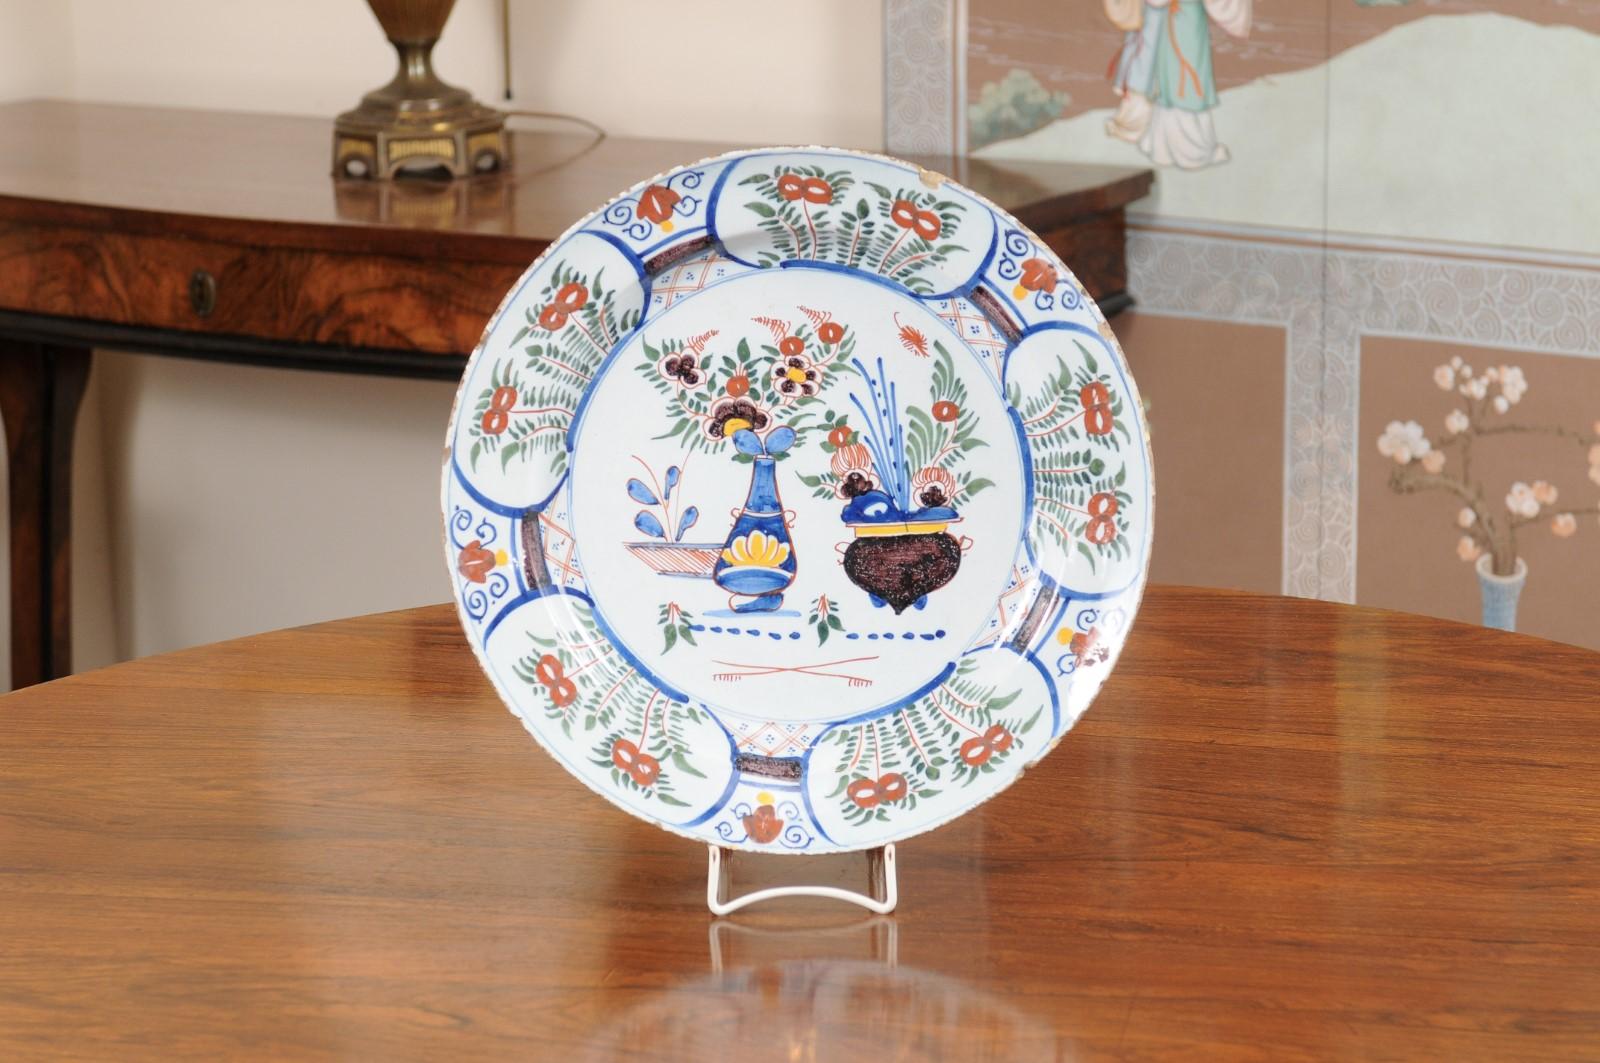 A large 18th Century Polychrome Painted Faience Charger with floral and pottery scene in the center with accents of red, green, blue and yellow.